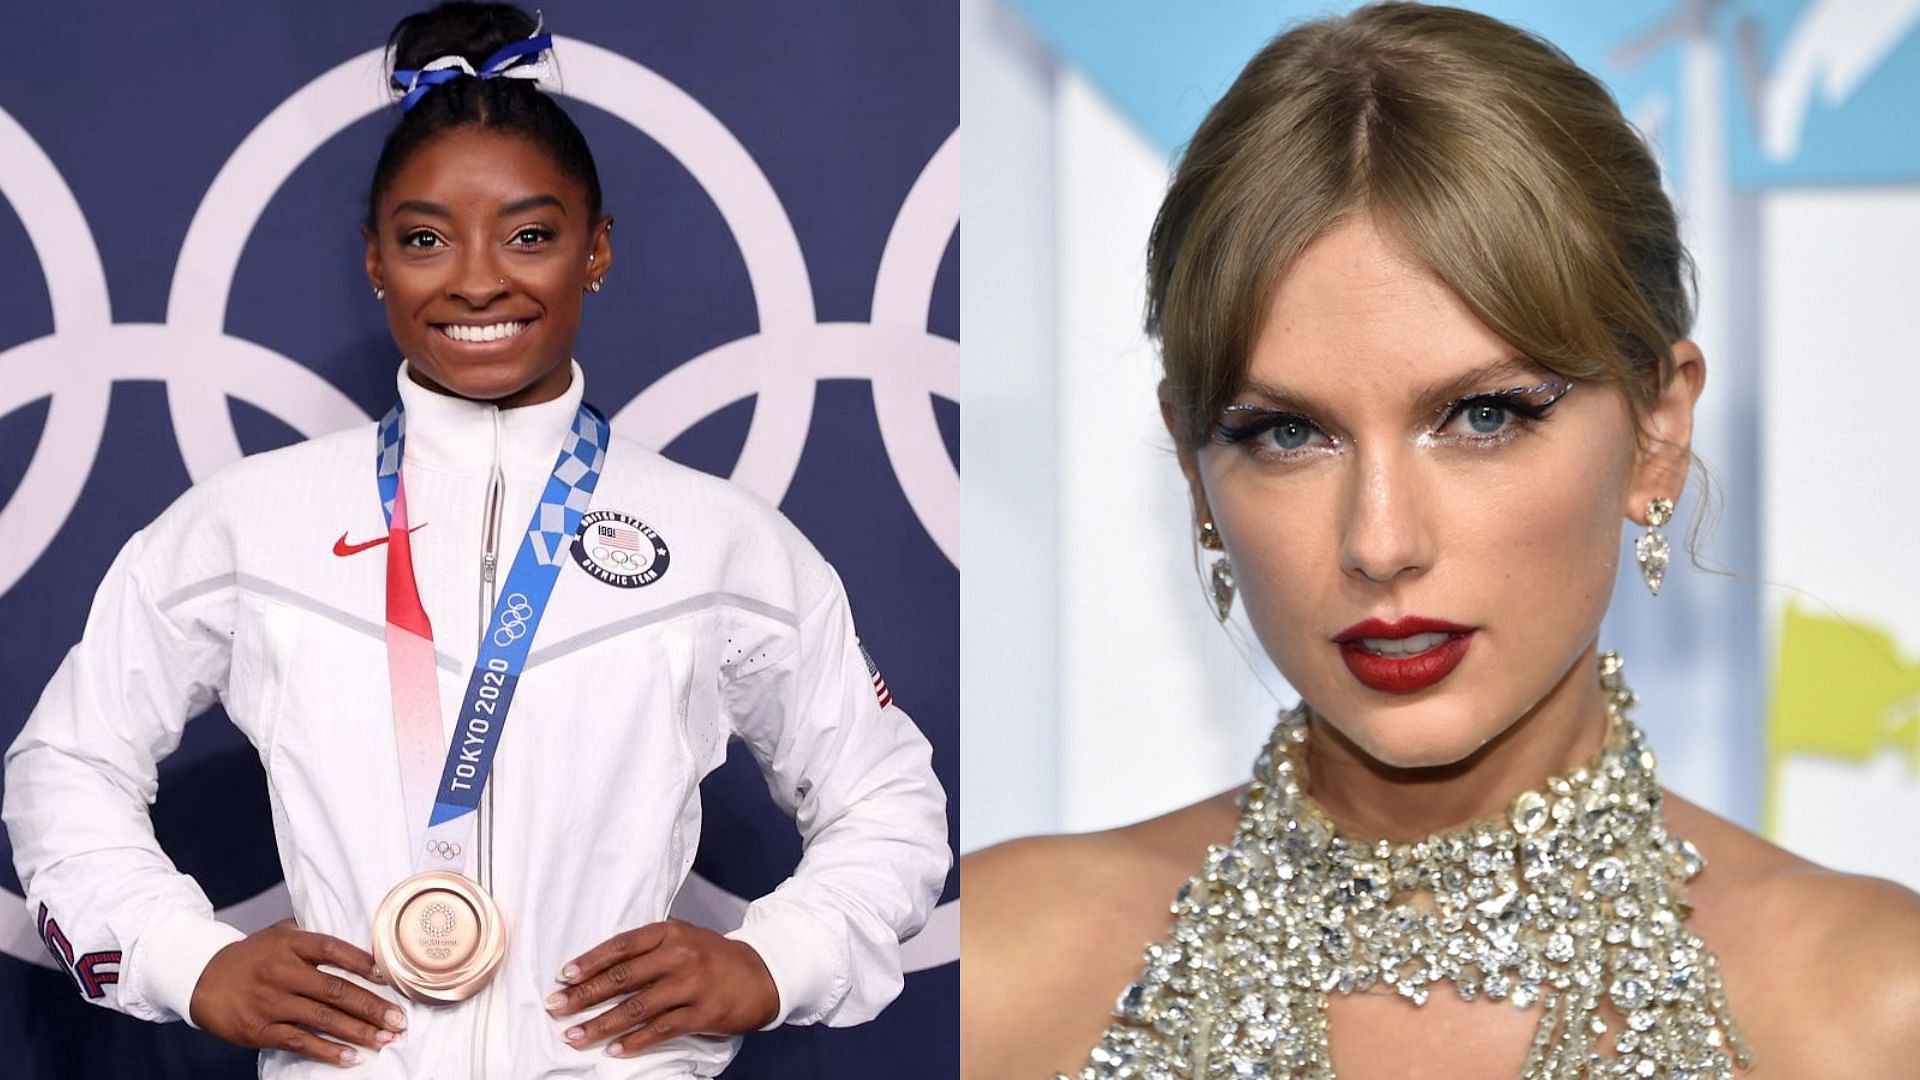 American gymnast Simone Biles received a personalized note and a copy of Speak Now (Taylor